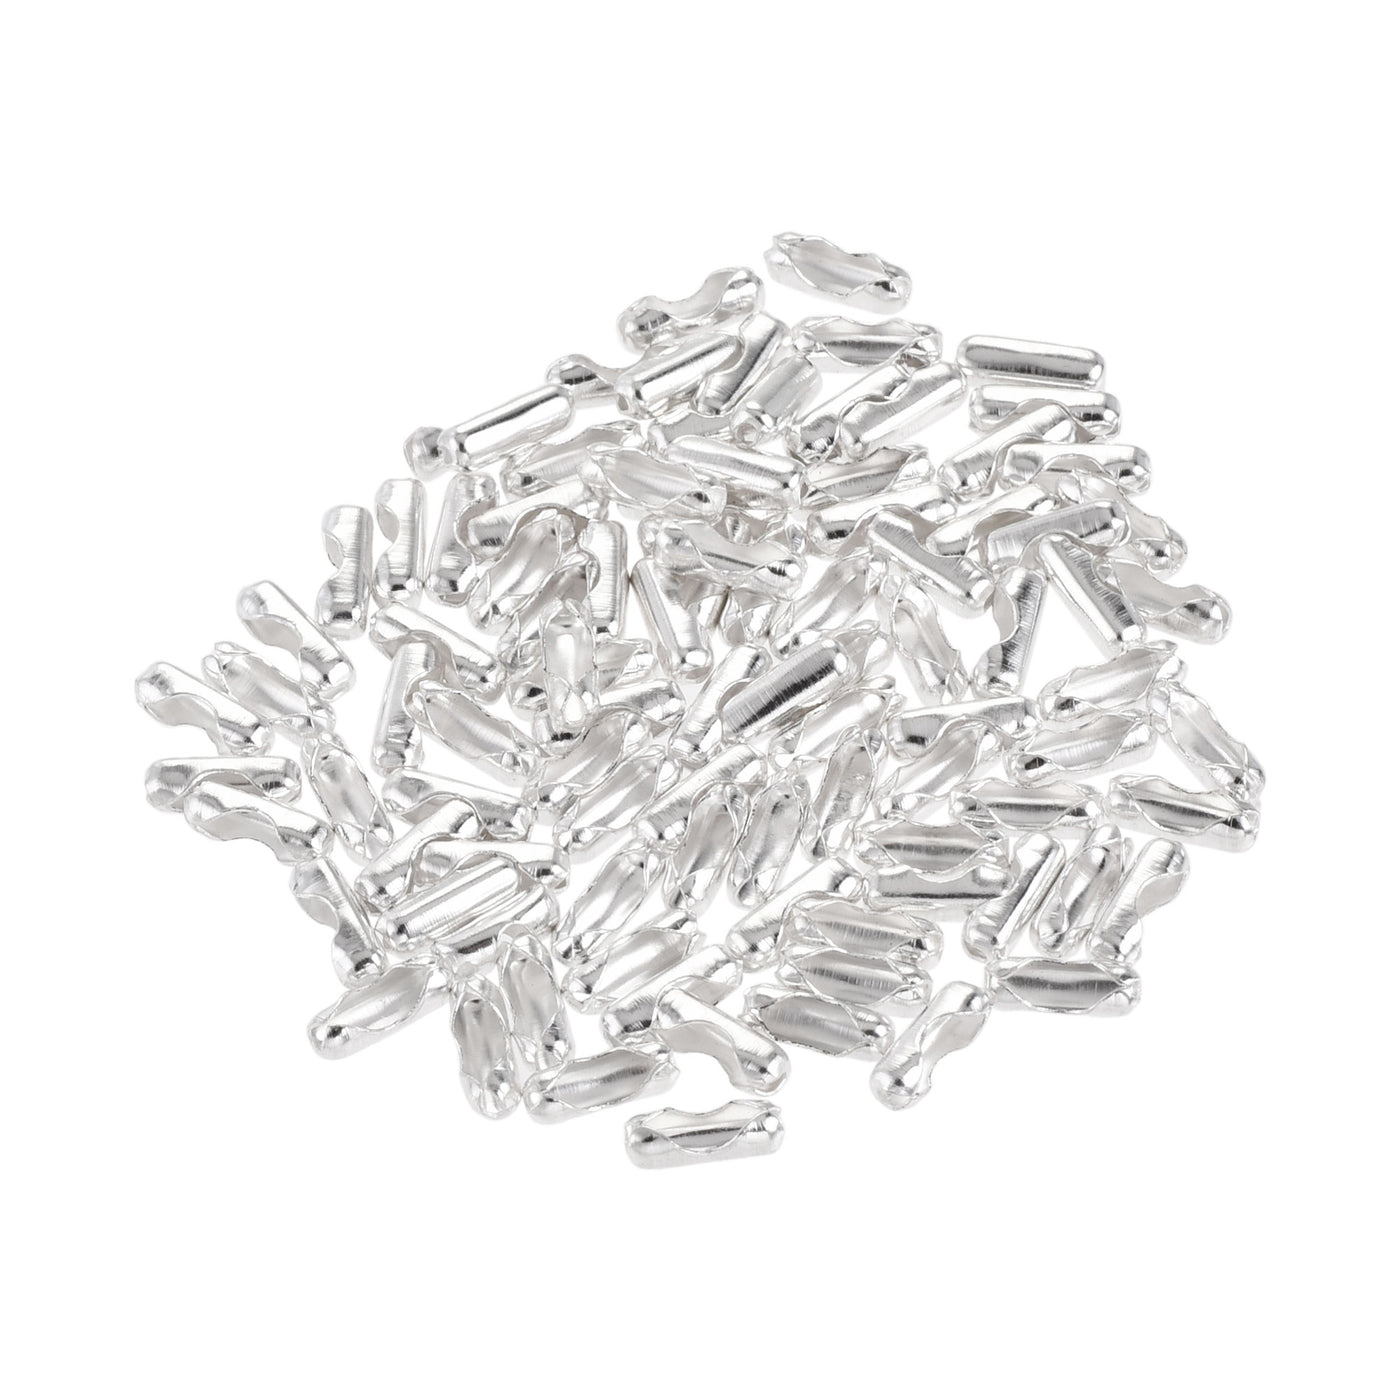 Uxcell Uxcell Ball Chain Connector, 1.5mm Ball Chains Clasp Crimp Link Clips Connection, Iron Electroplating Silver White, Pack of 100